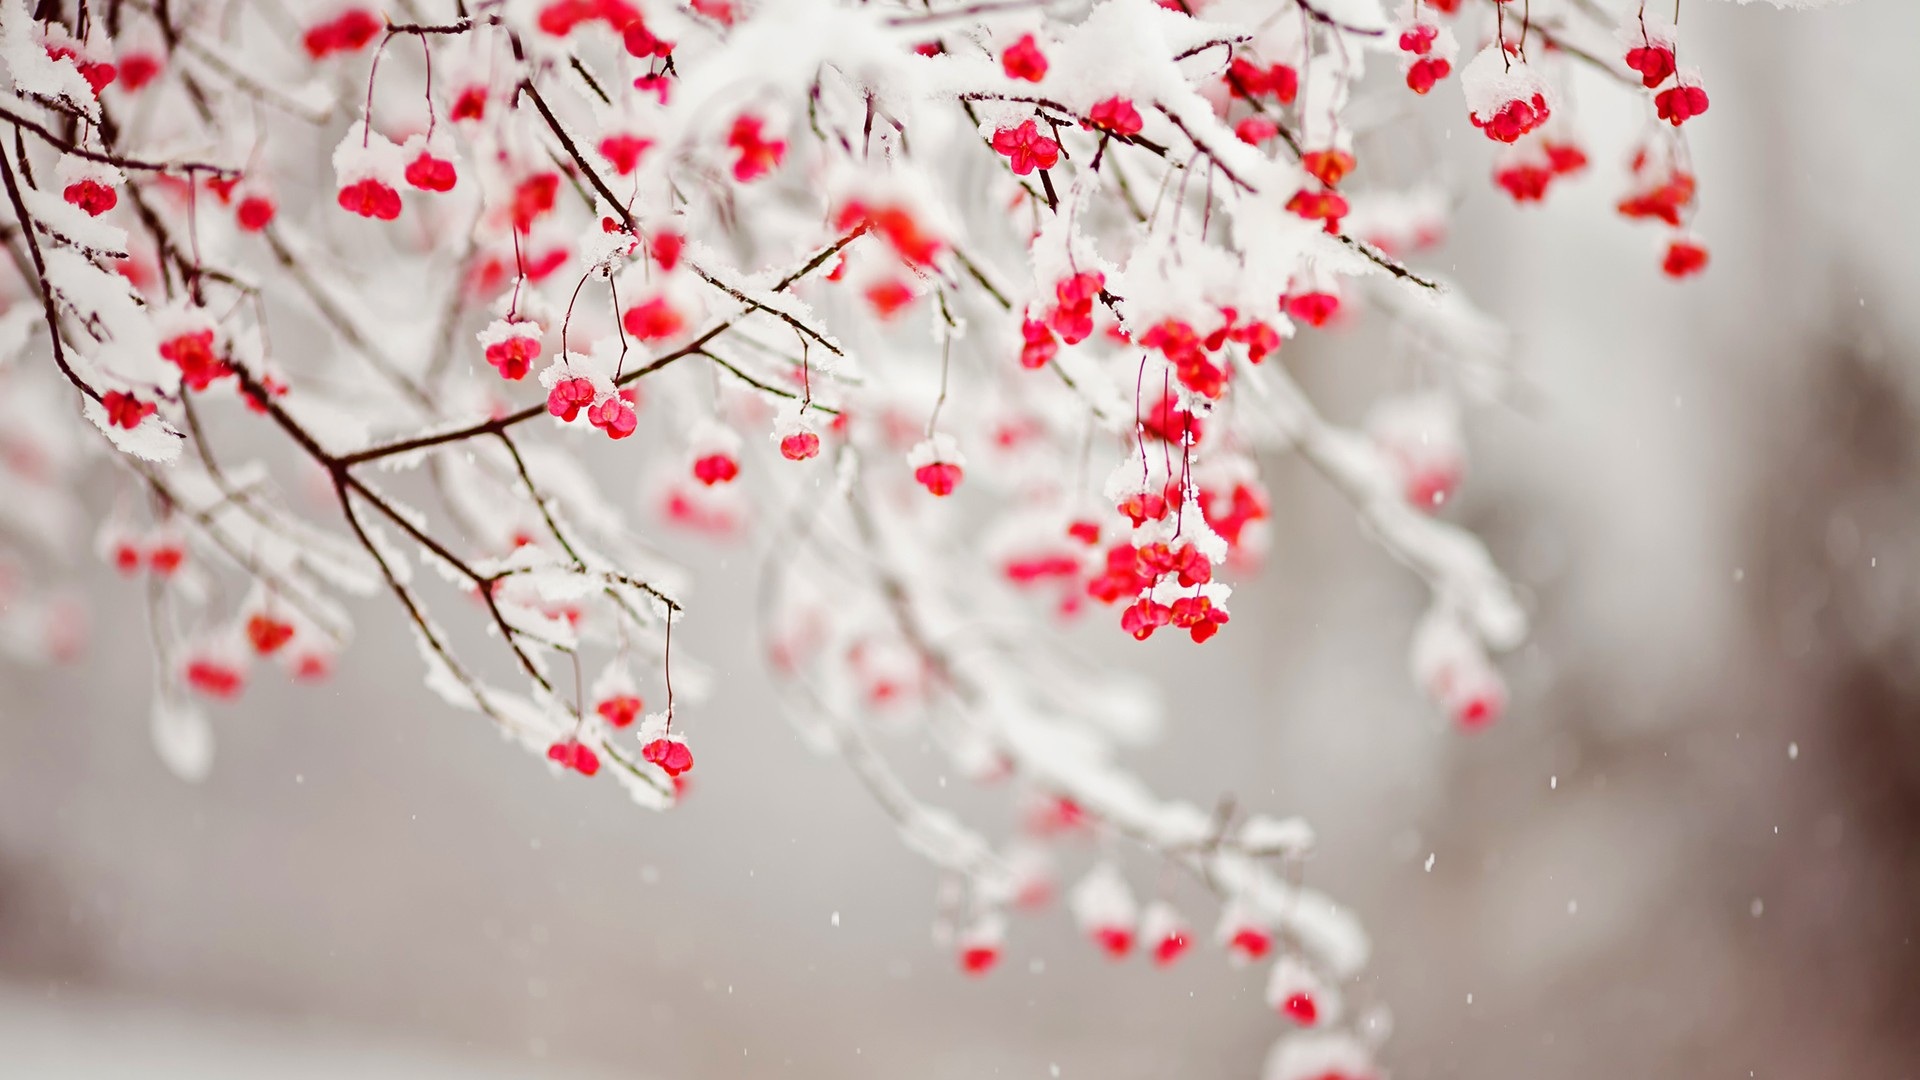 Snow and berries photo